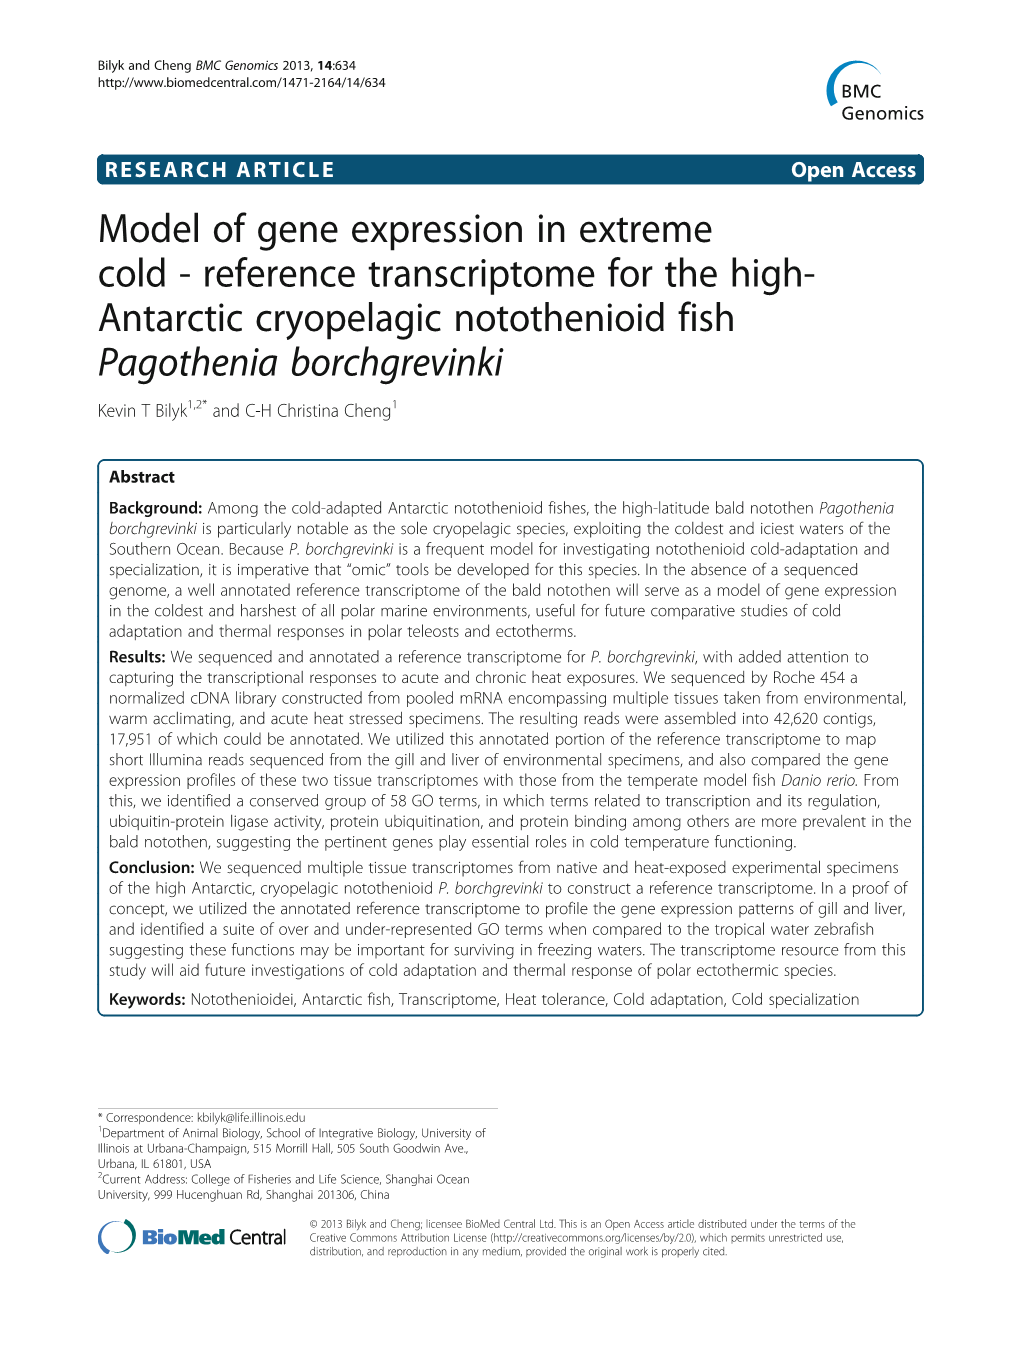 Model of Gene Expression in Extreme Cold